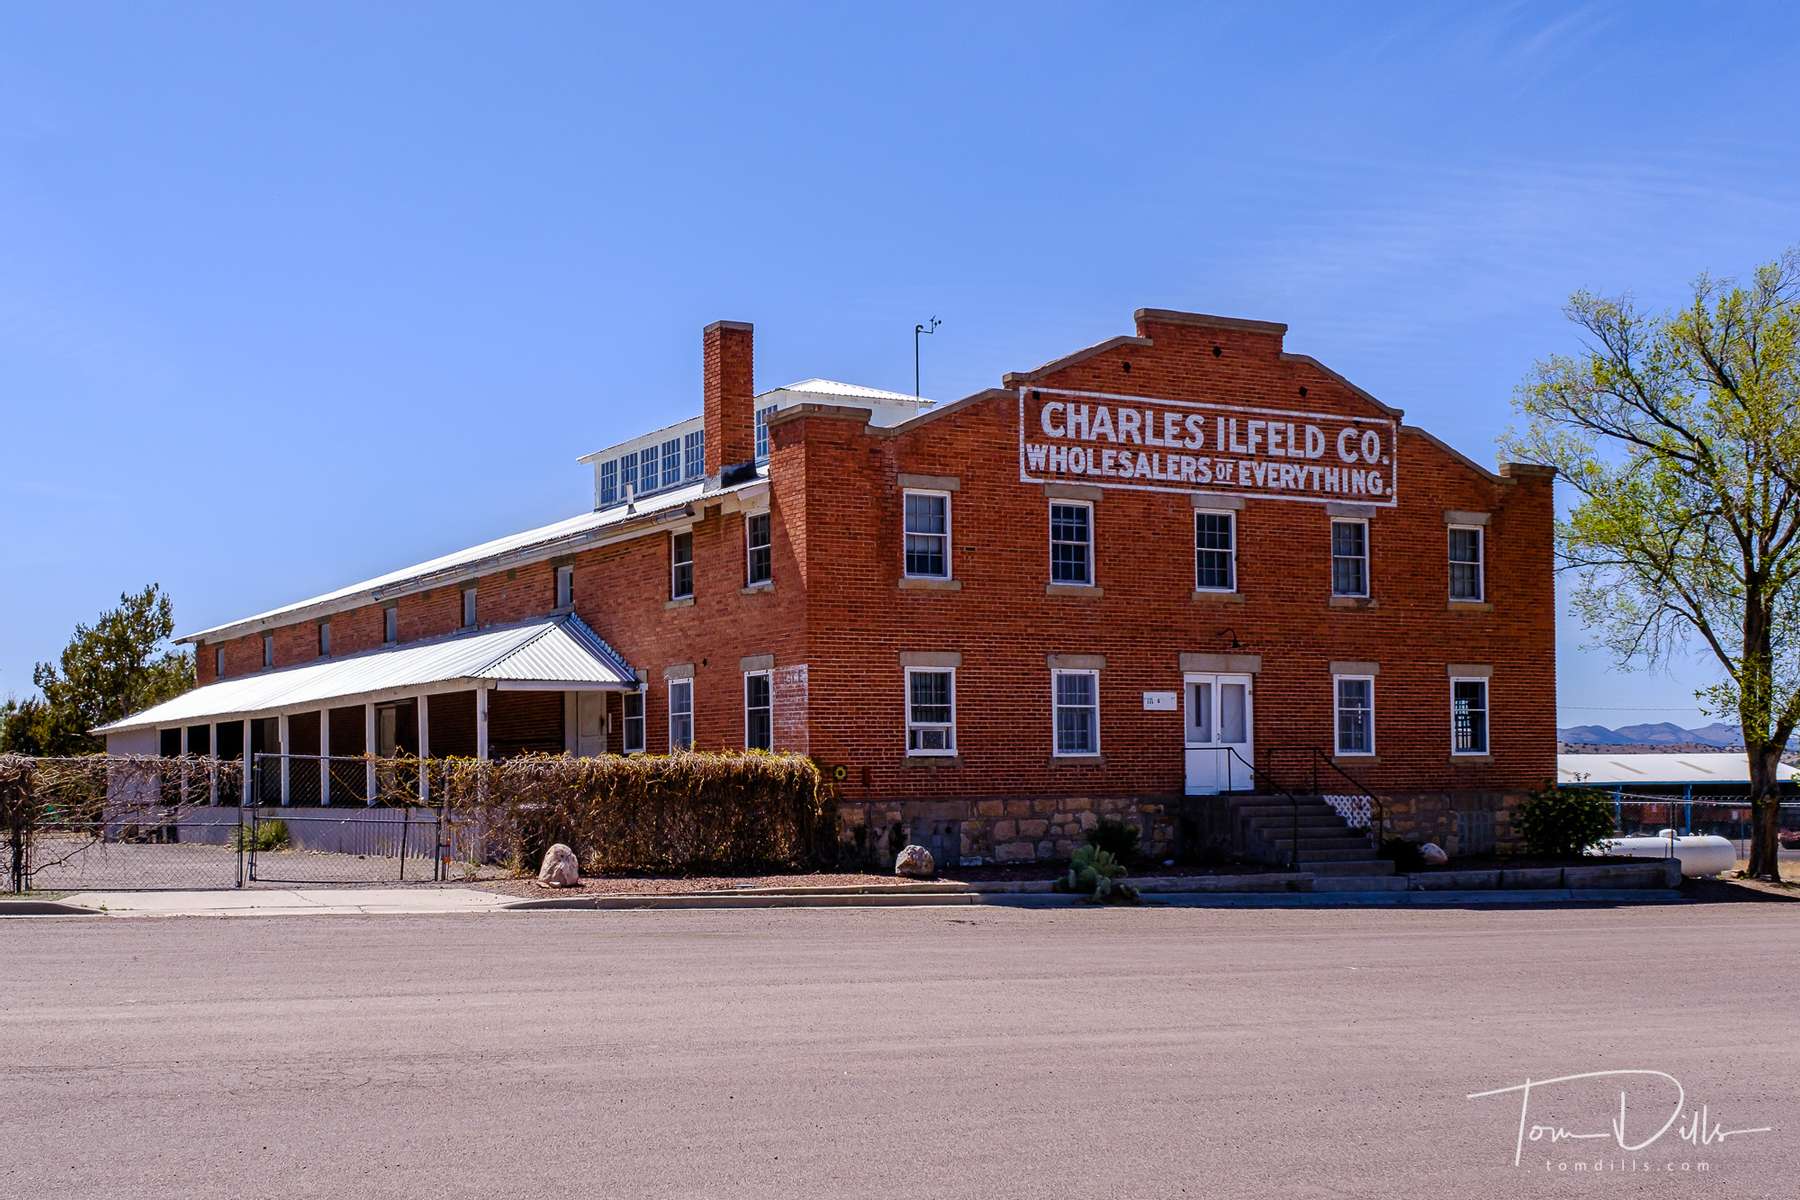 Charles Ilfeld Co. {quote}Wholesalers of Everything{quote} building in Magdalena, New Mexico